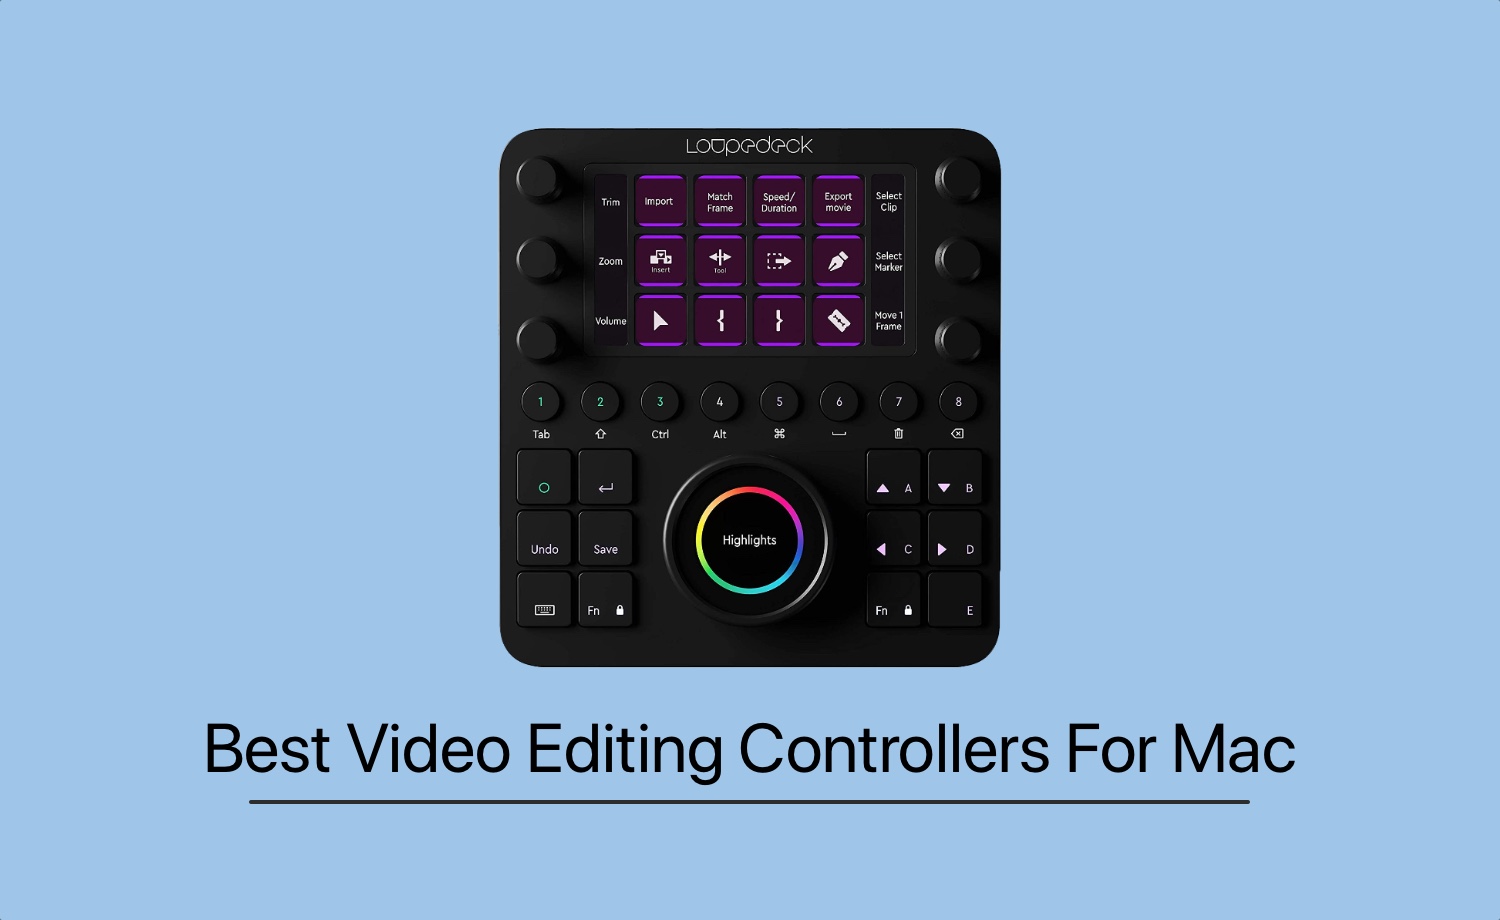 Best Video And Photo Editing Controllers For Mac